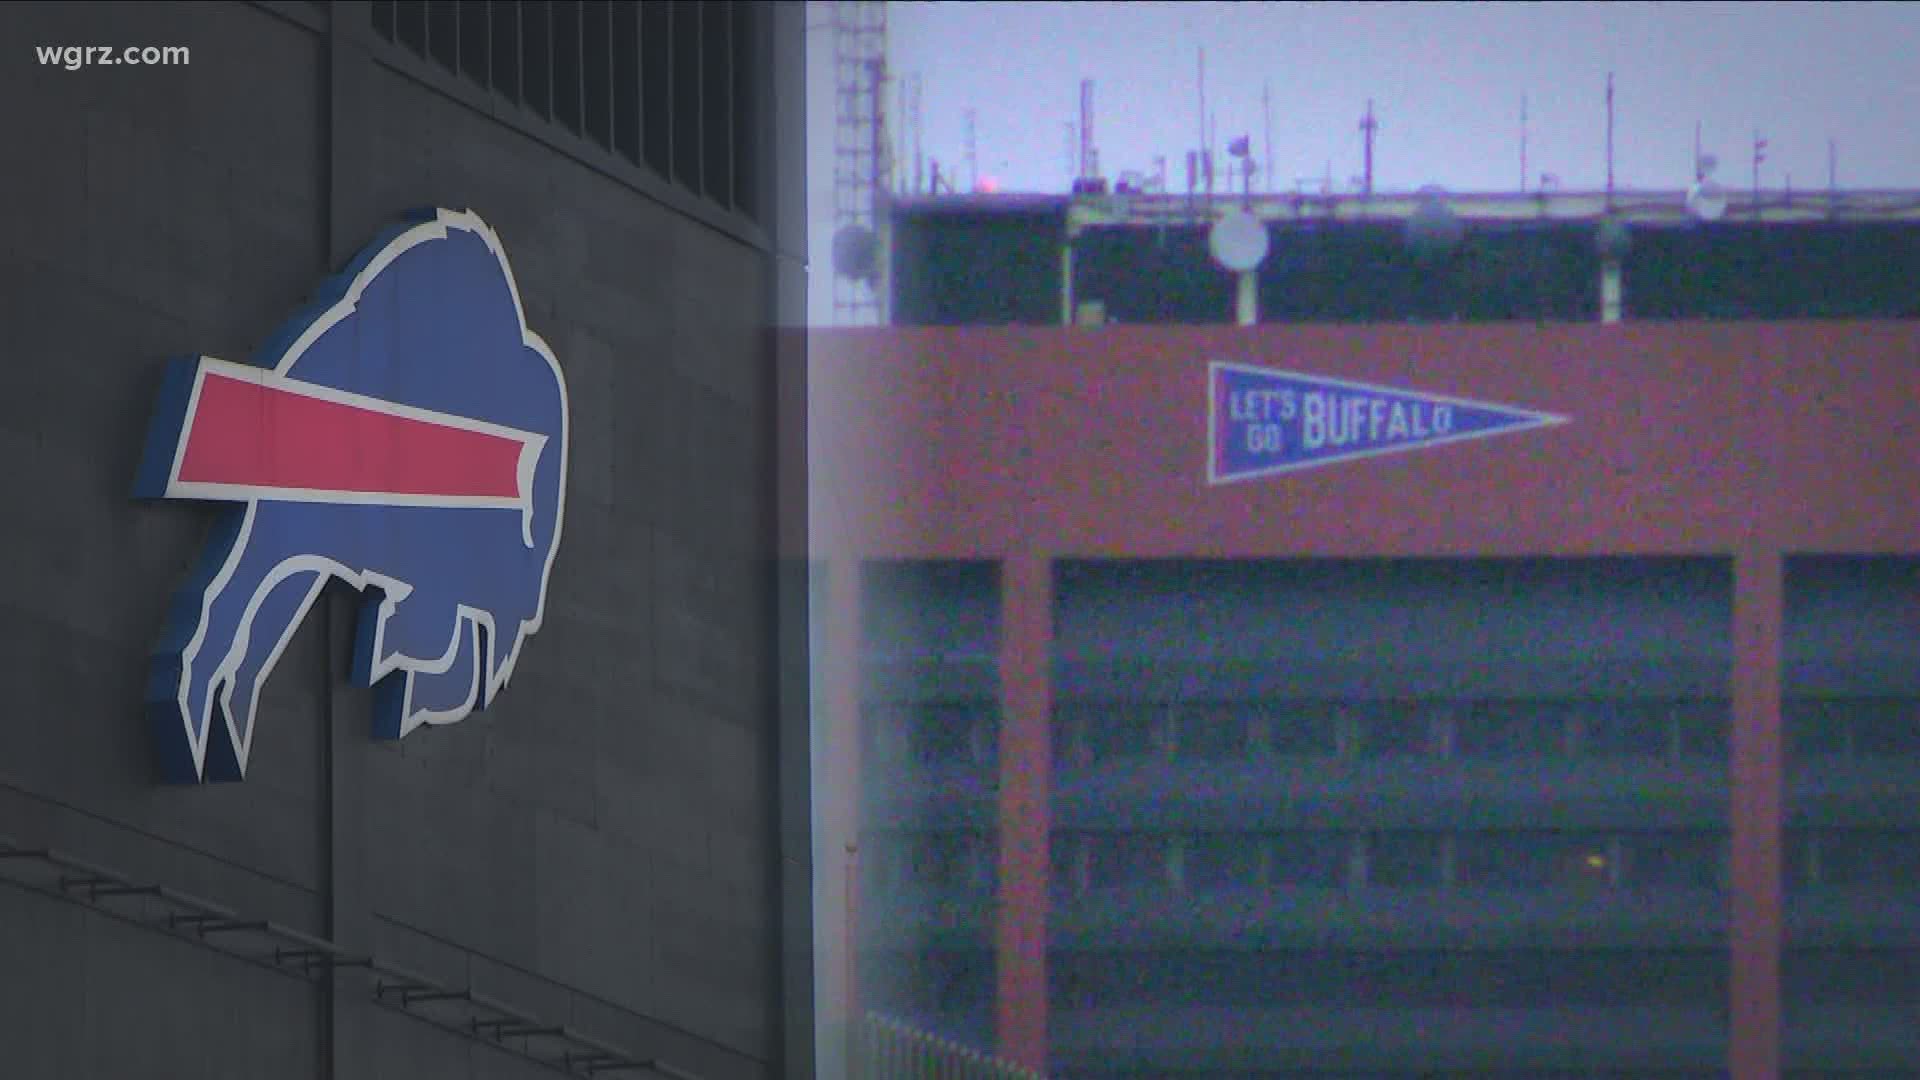 If you're driving or walking around downtown Buffalo, you might notice the city's tallest building has some new décor.